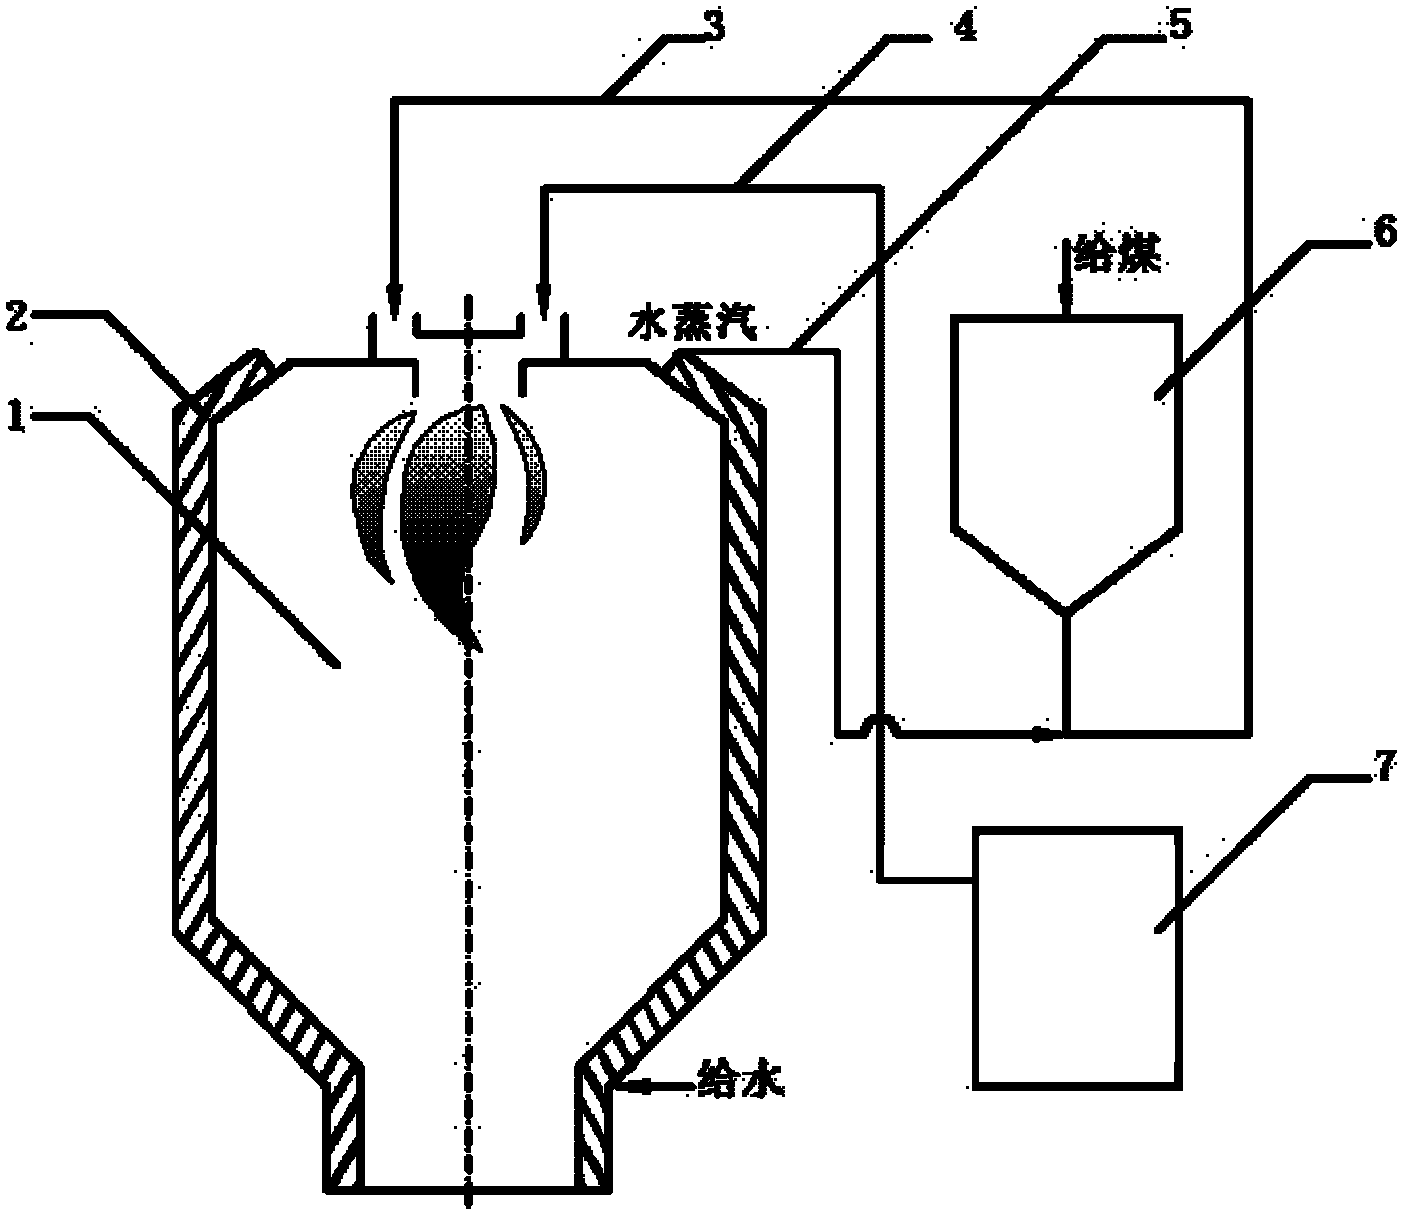 Entrained-flow bed gasification system and method for vapour conveyed pulverized coal